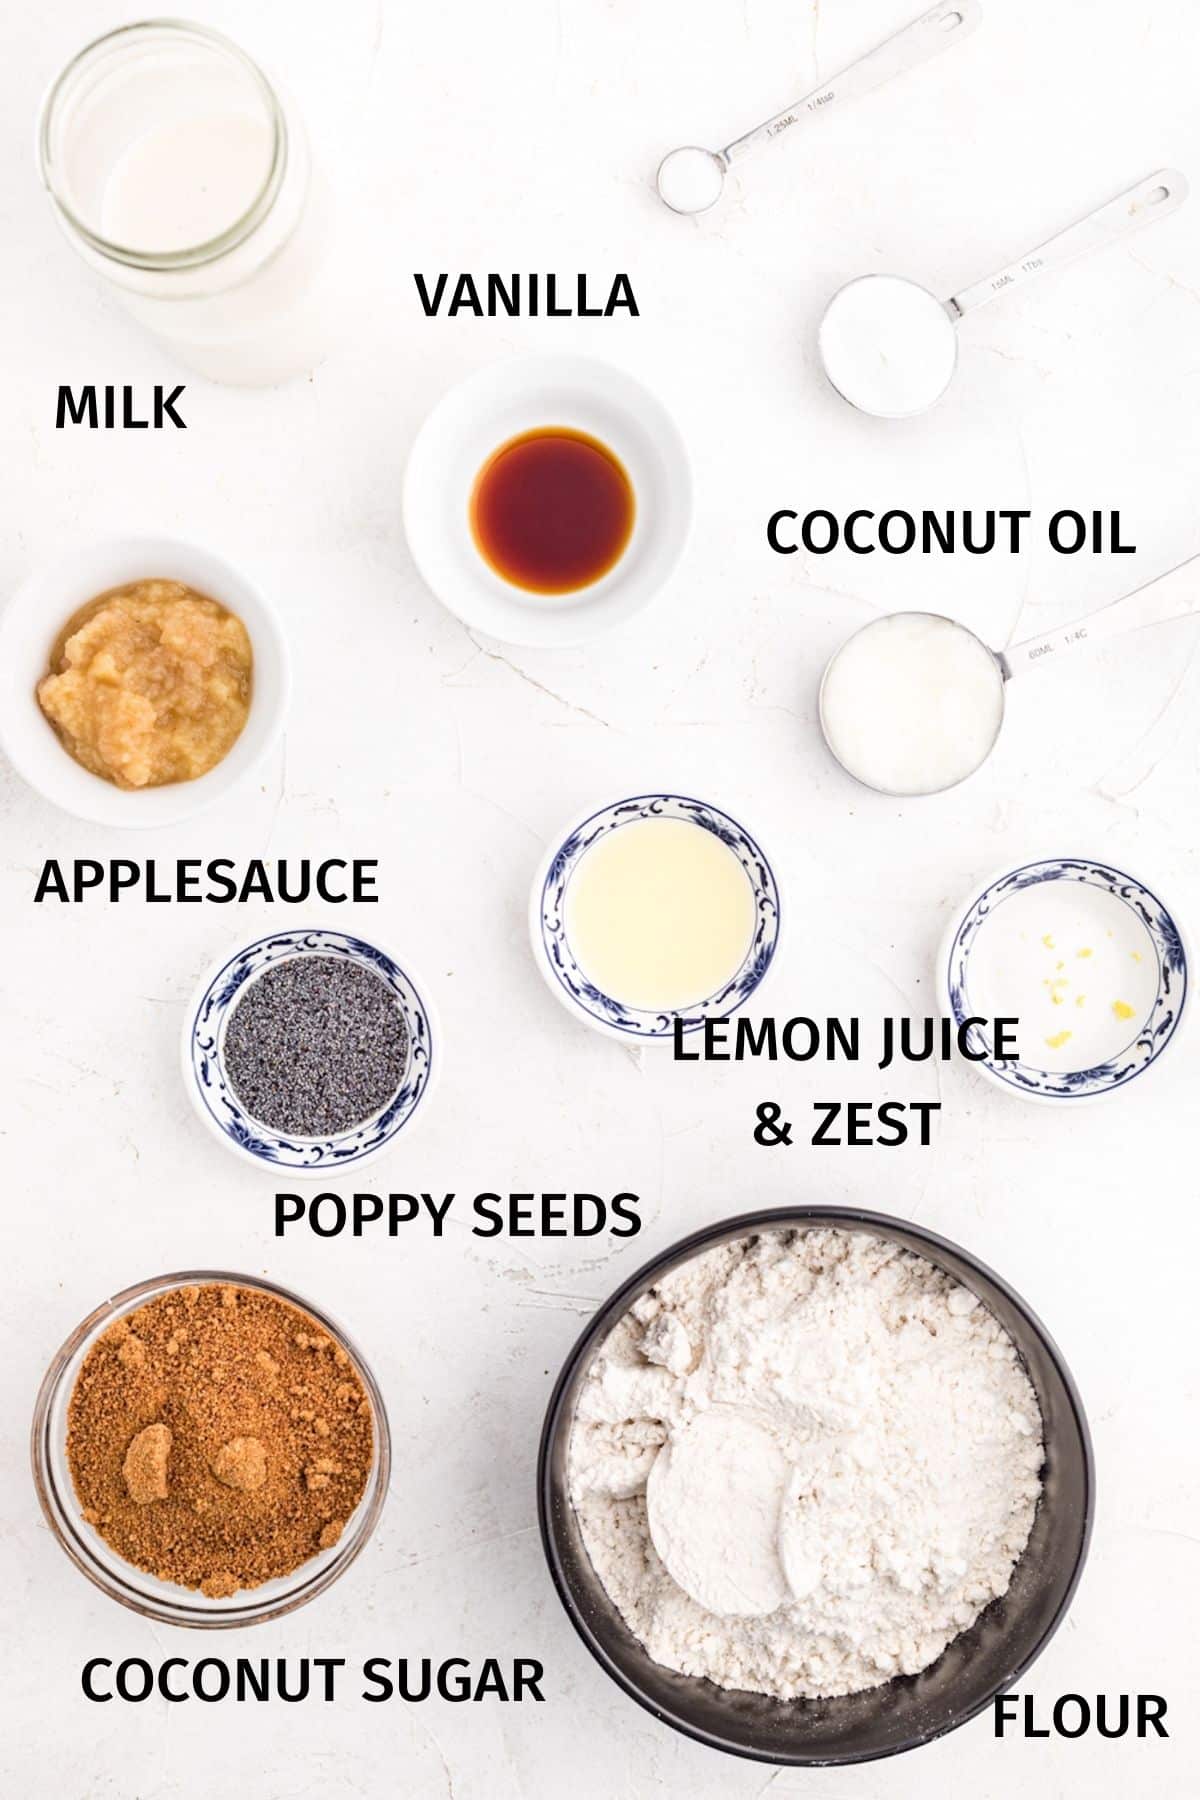 Ingredients for gluten-free vegan lemon poppy seed muffins in small bowls on a white surface.